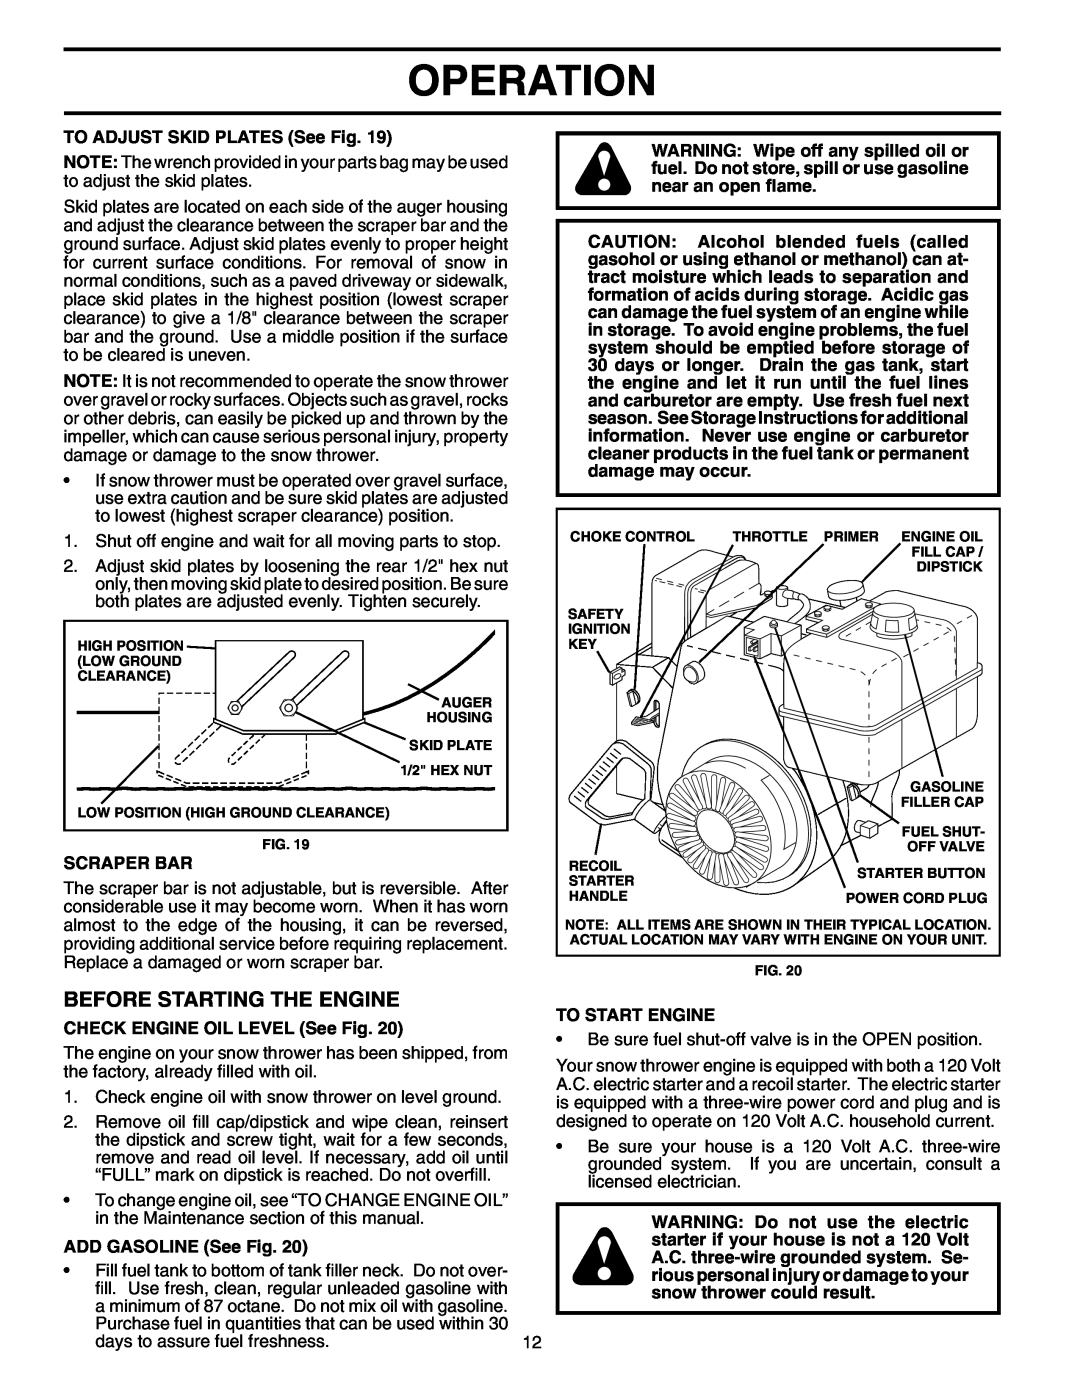 Poulan 96192000600 Before Starting The Engine, Operation, TO ADJUST SKID PLATES See Fig, Scraper Bar, ADD GASOLINE See Fig 